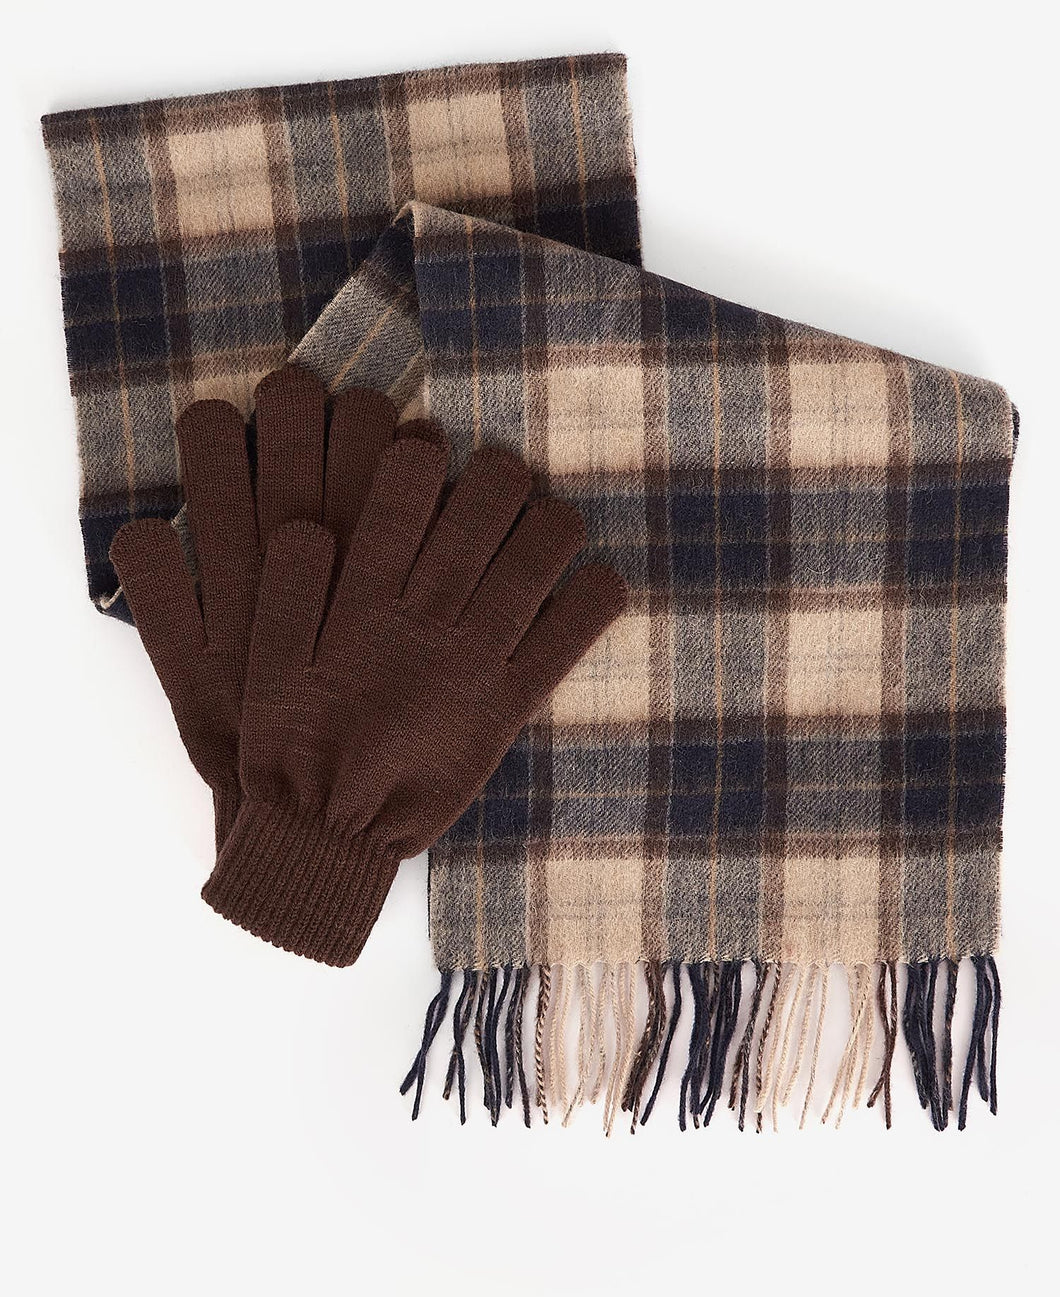 Barbour - Tartan Scarf And Glove Gift Set, Brown